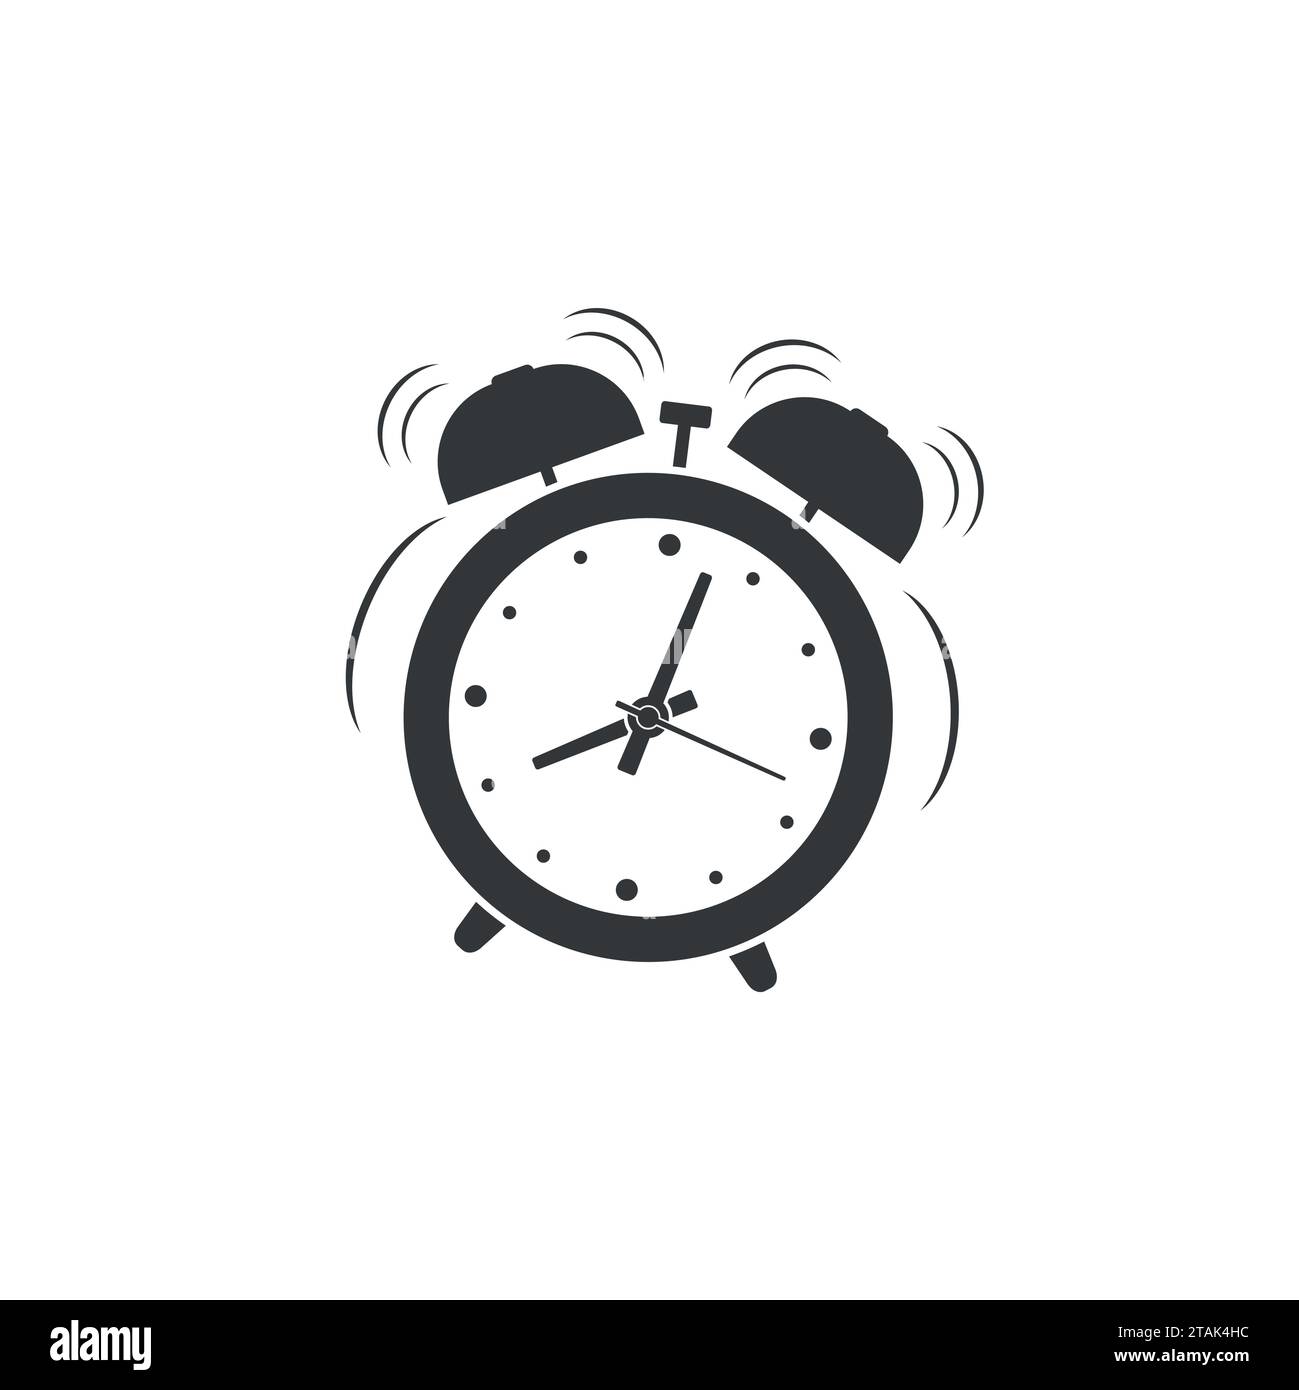 Alarm clock rings time Royalty Free Vector Image